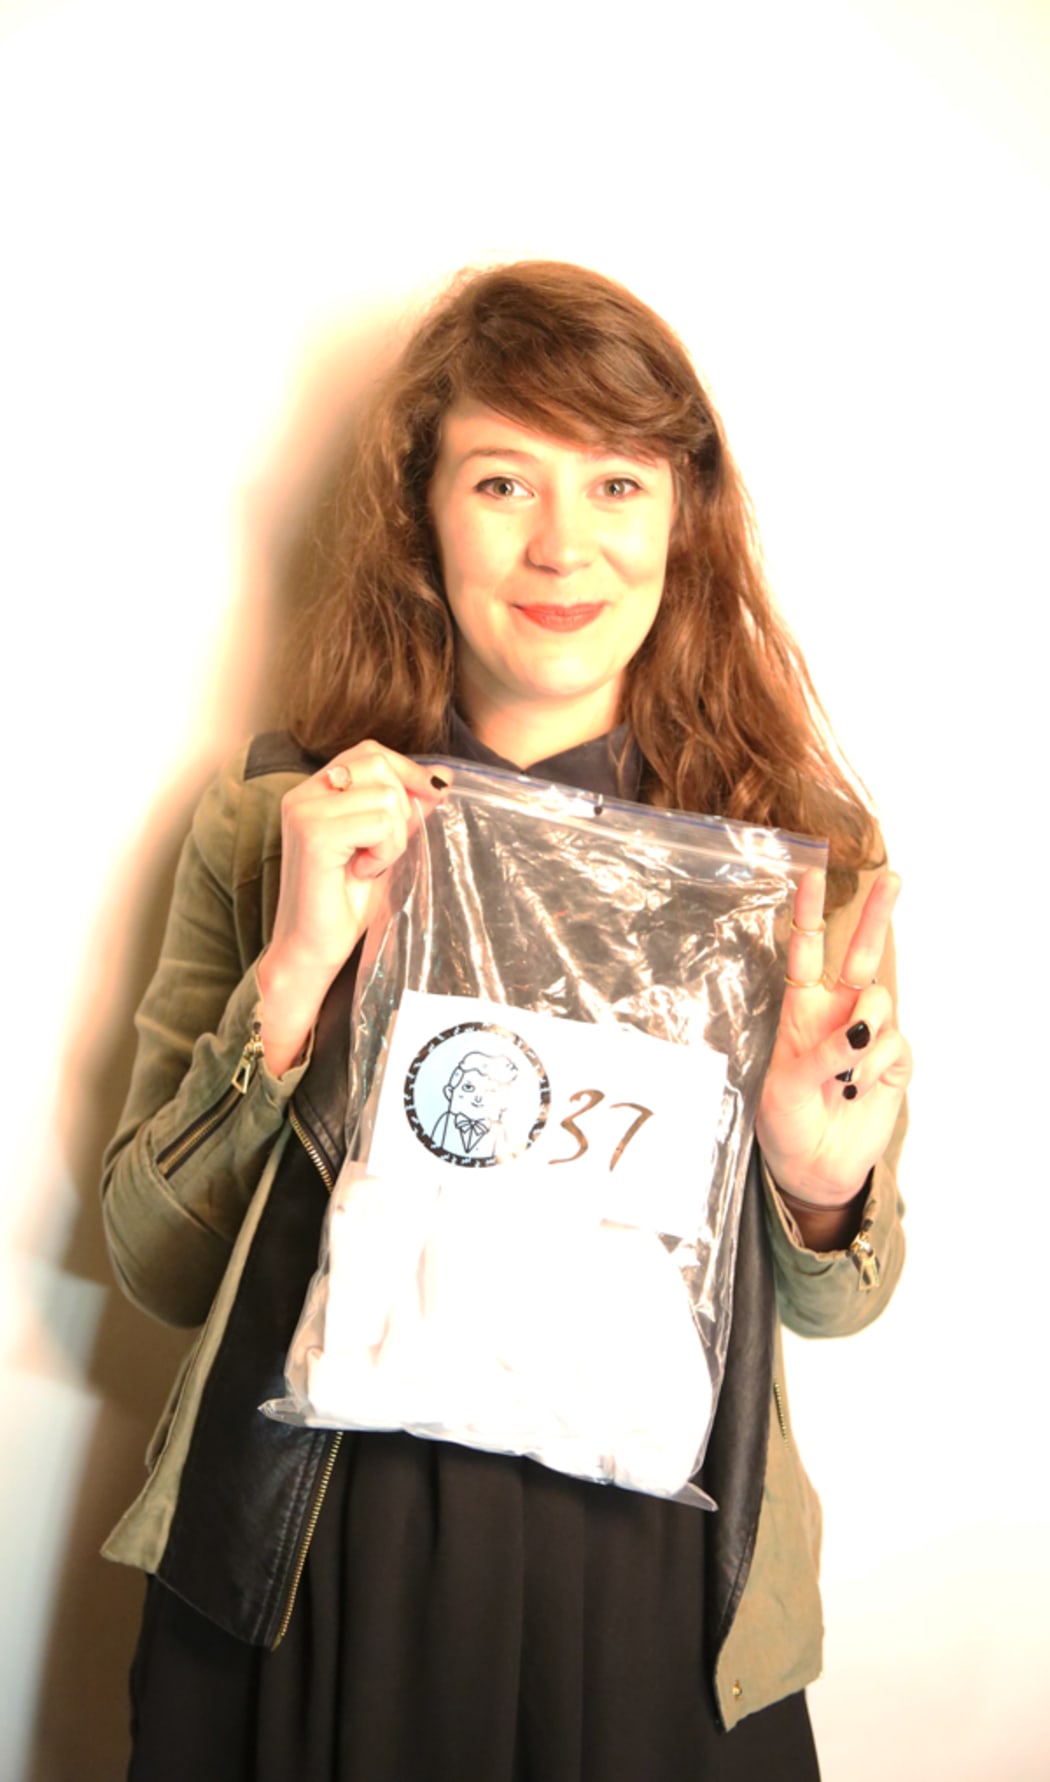 A picture of Julia Hollingsworth holding a bagged T-shirt labelled #37